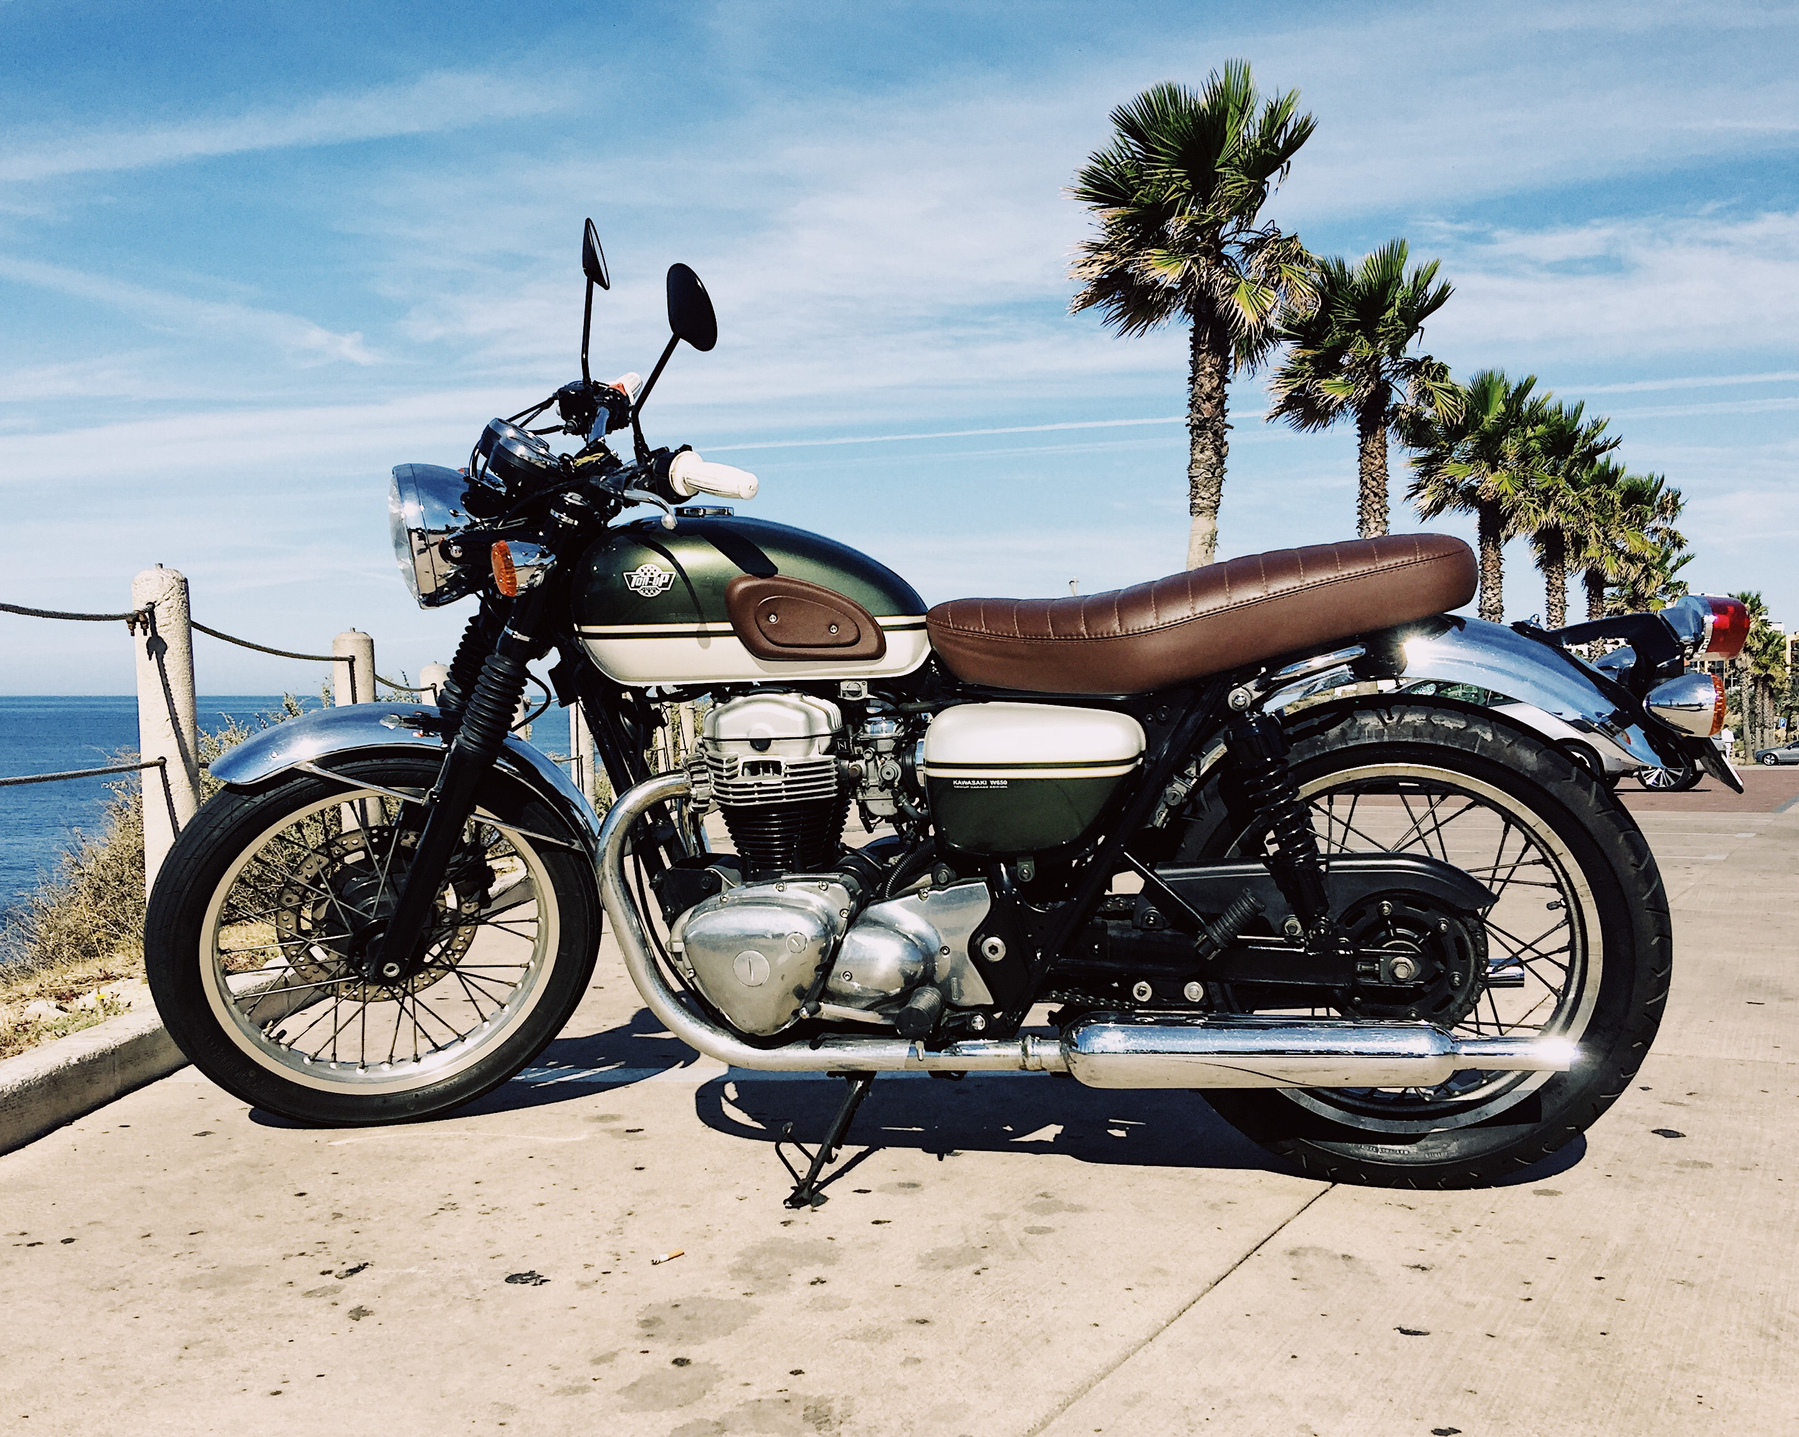 a motorcycle, parked close to a few palm trees.